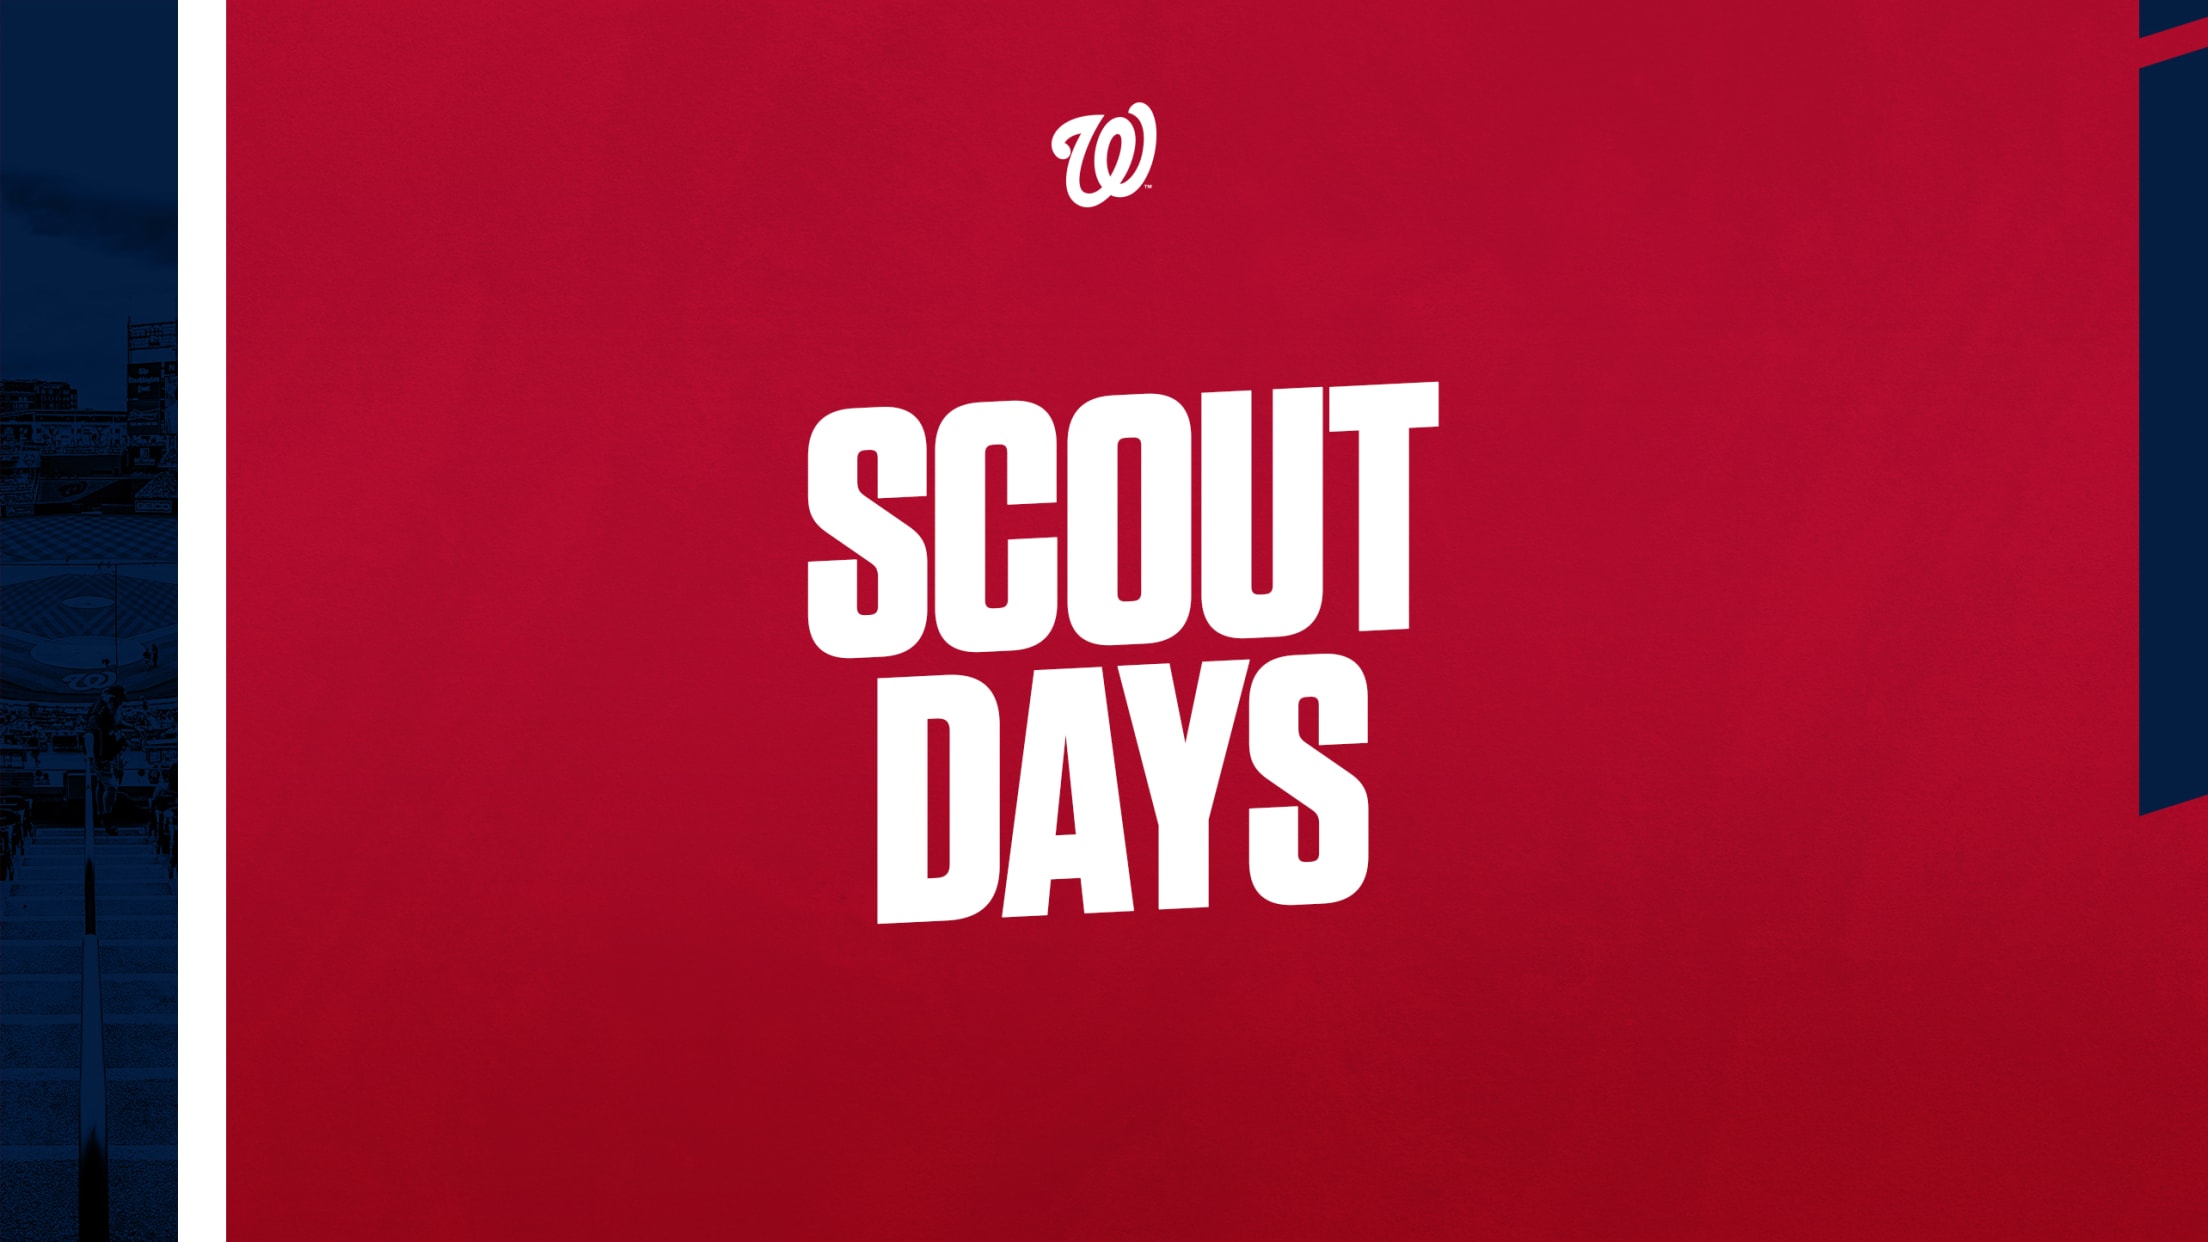 Get Your Tickets Now for the Nats' Best 2022 Theme Nights - InsideHook